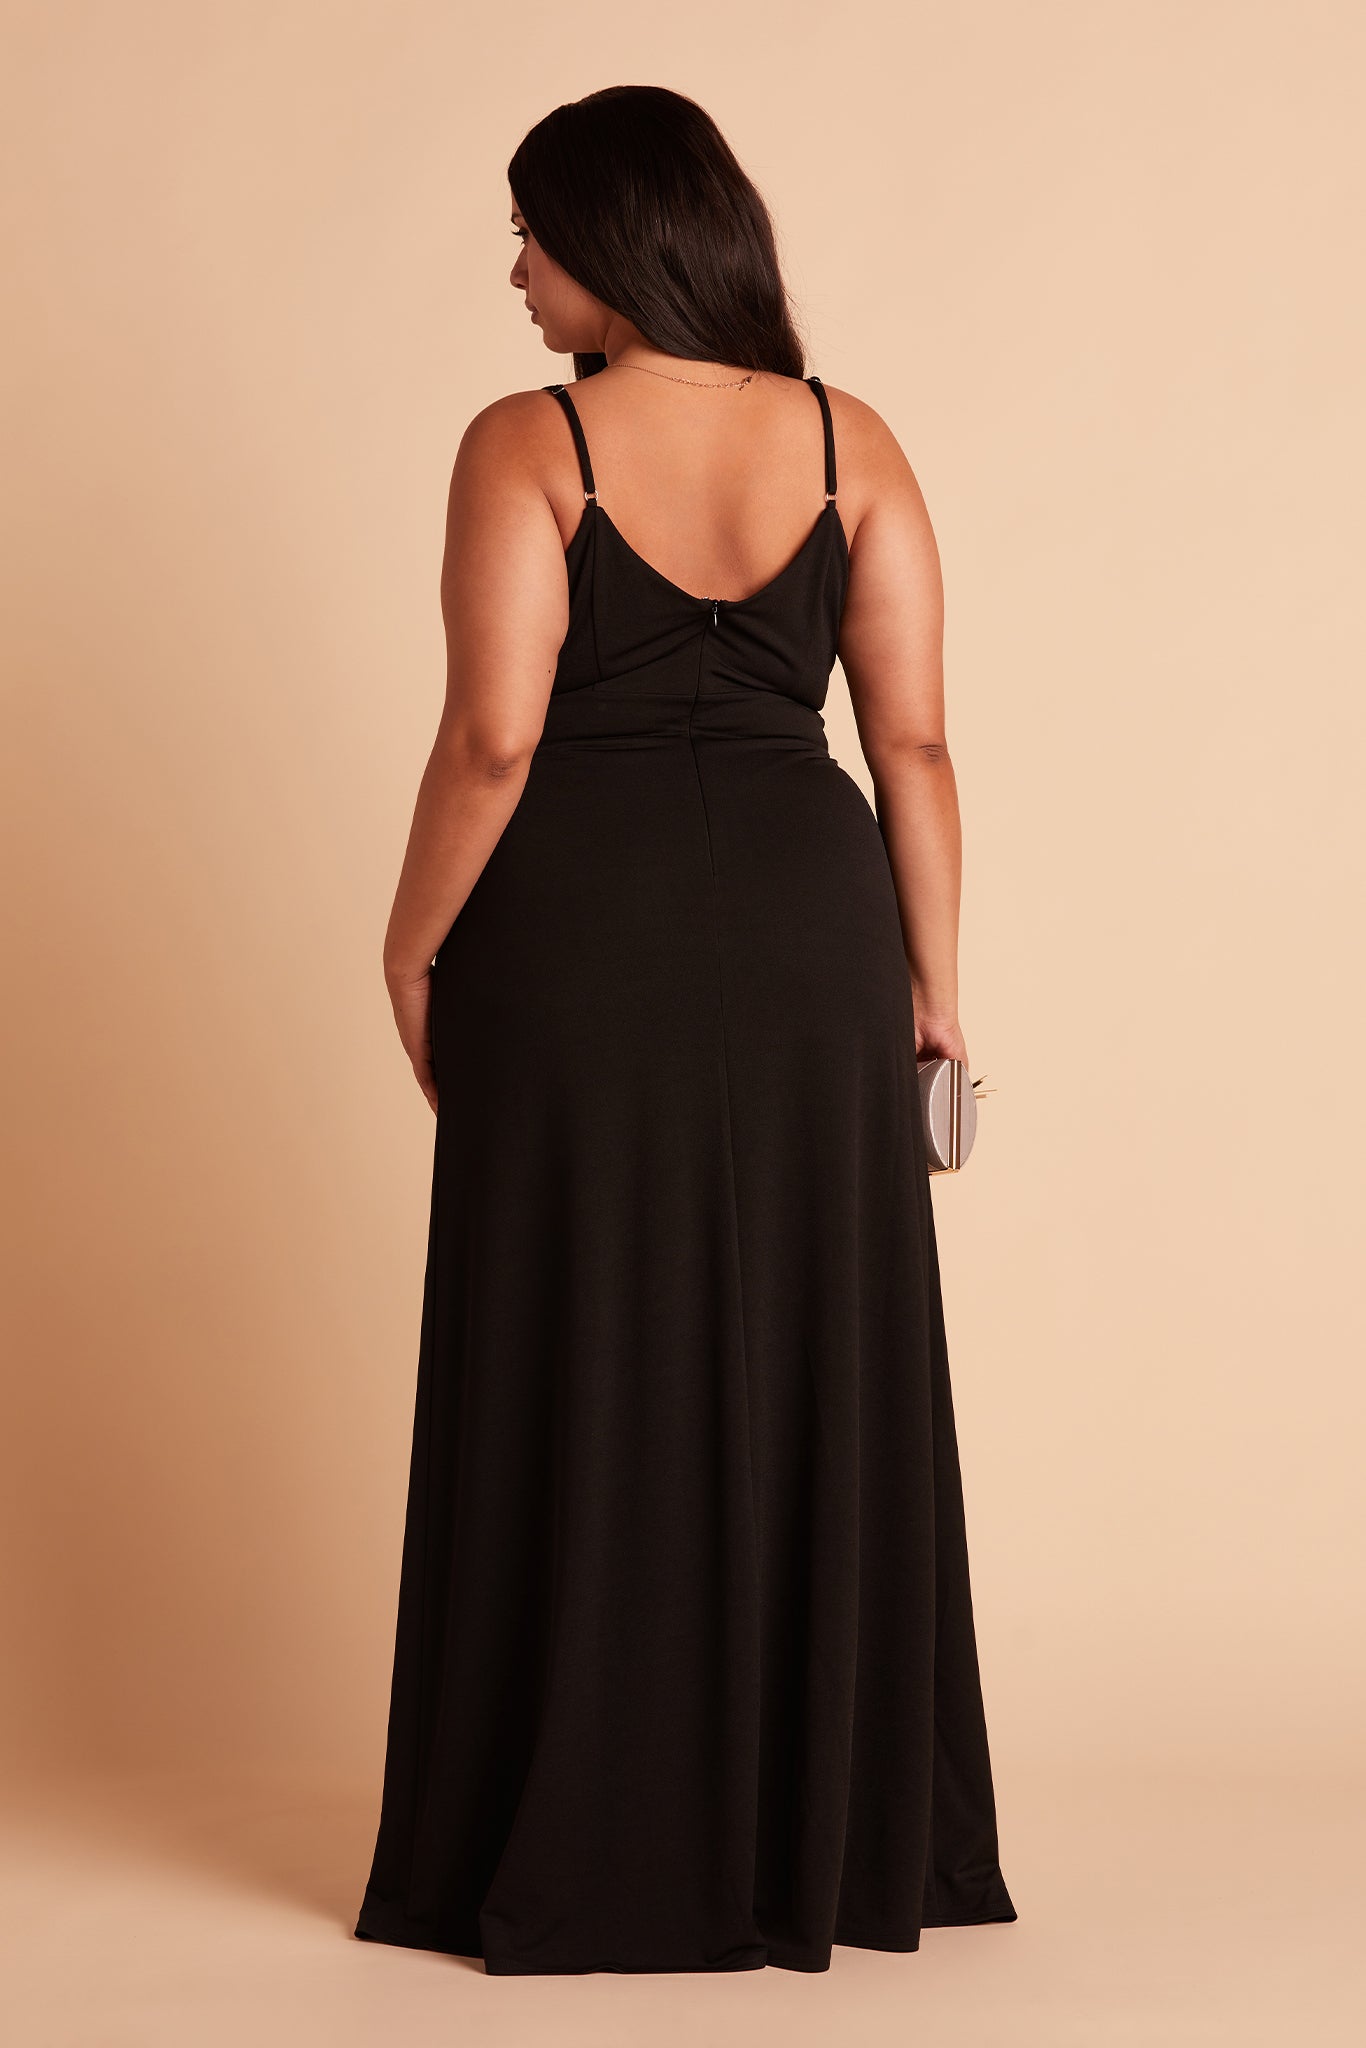 Jay plus size bridesmaid dress with slit in black crepe by Birdy Grey, back view